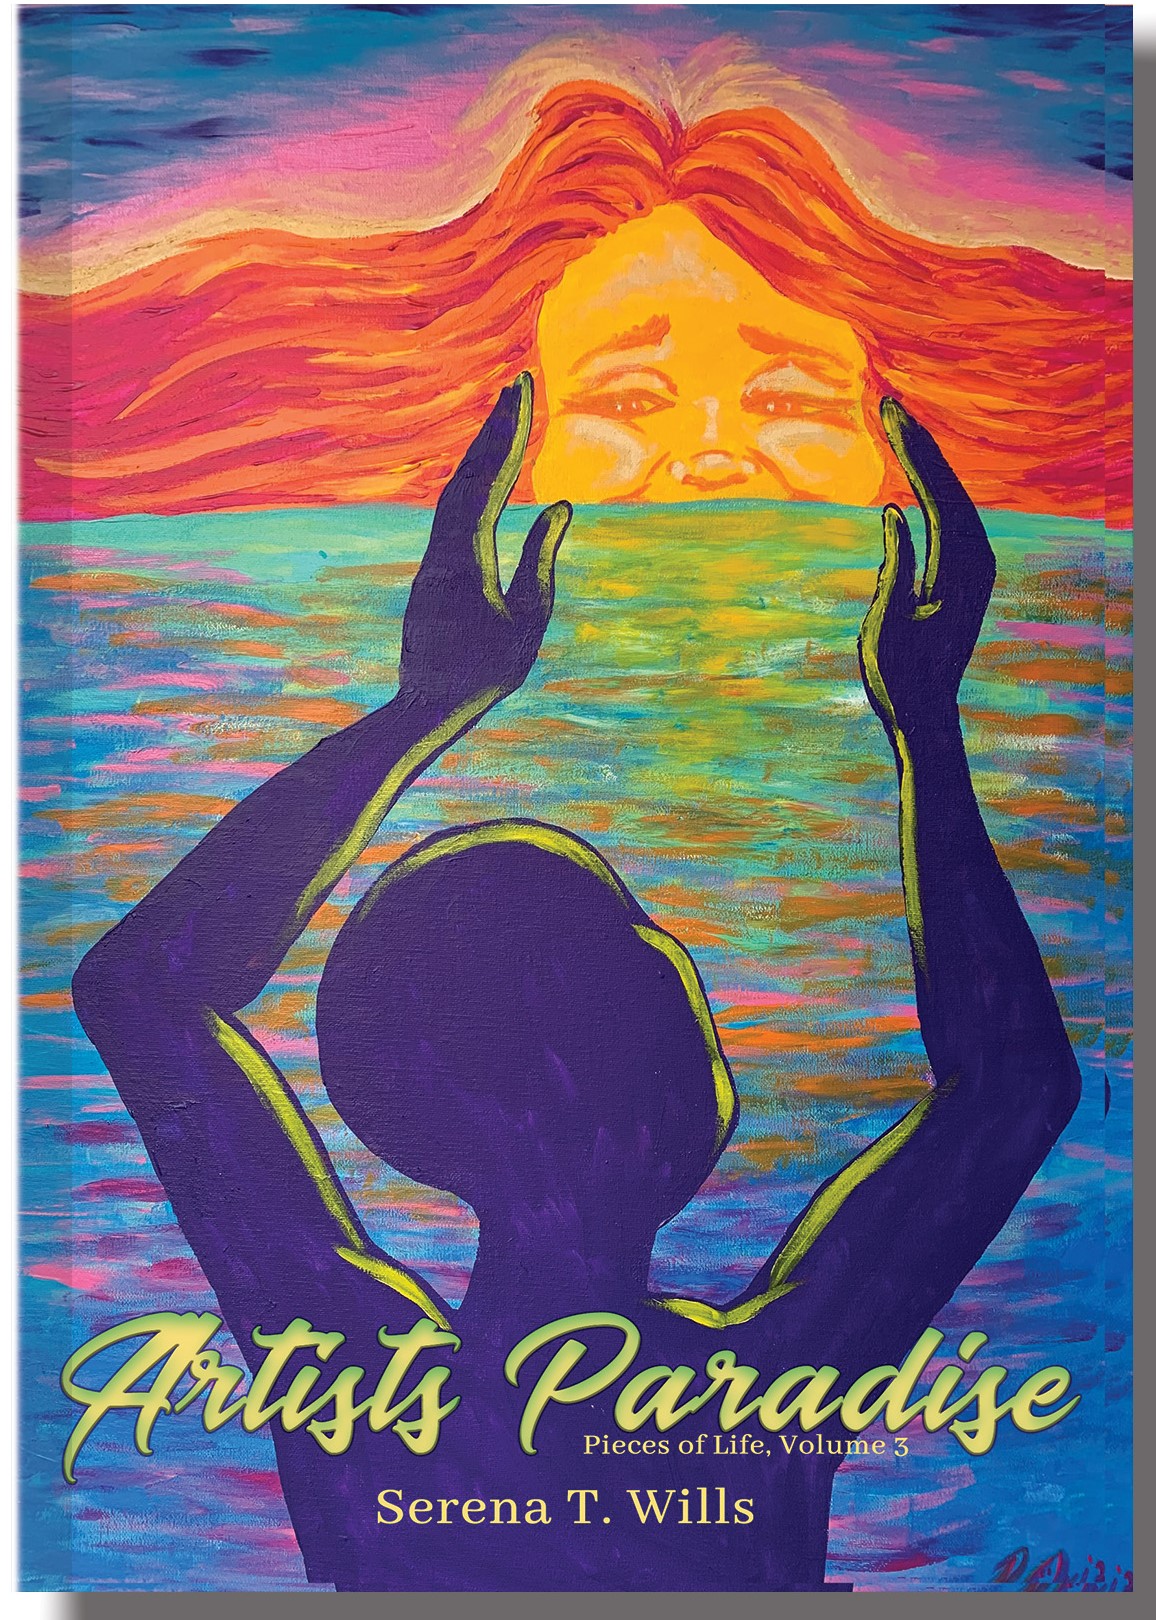 Artists Paradise, Pieces of Life Volume 3 (E-BOOK) NEW Product! 